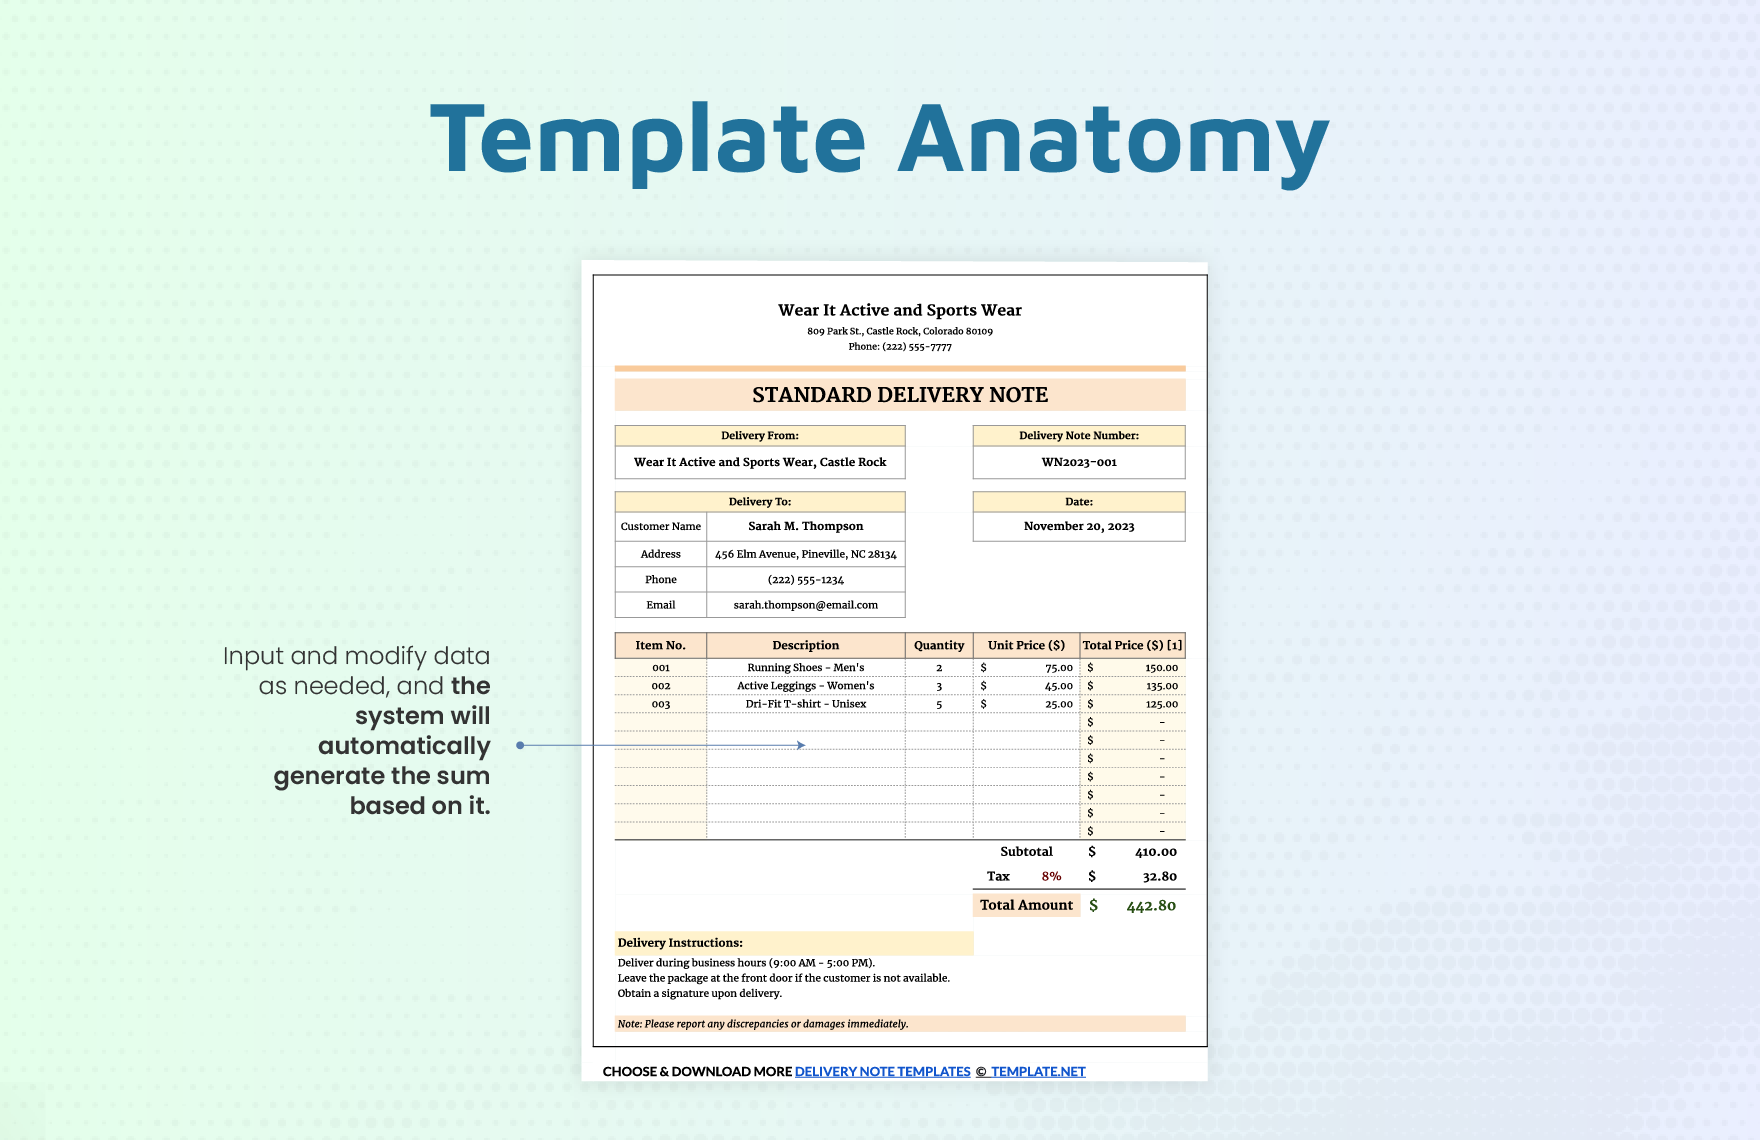 Standard Delivery Note Template